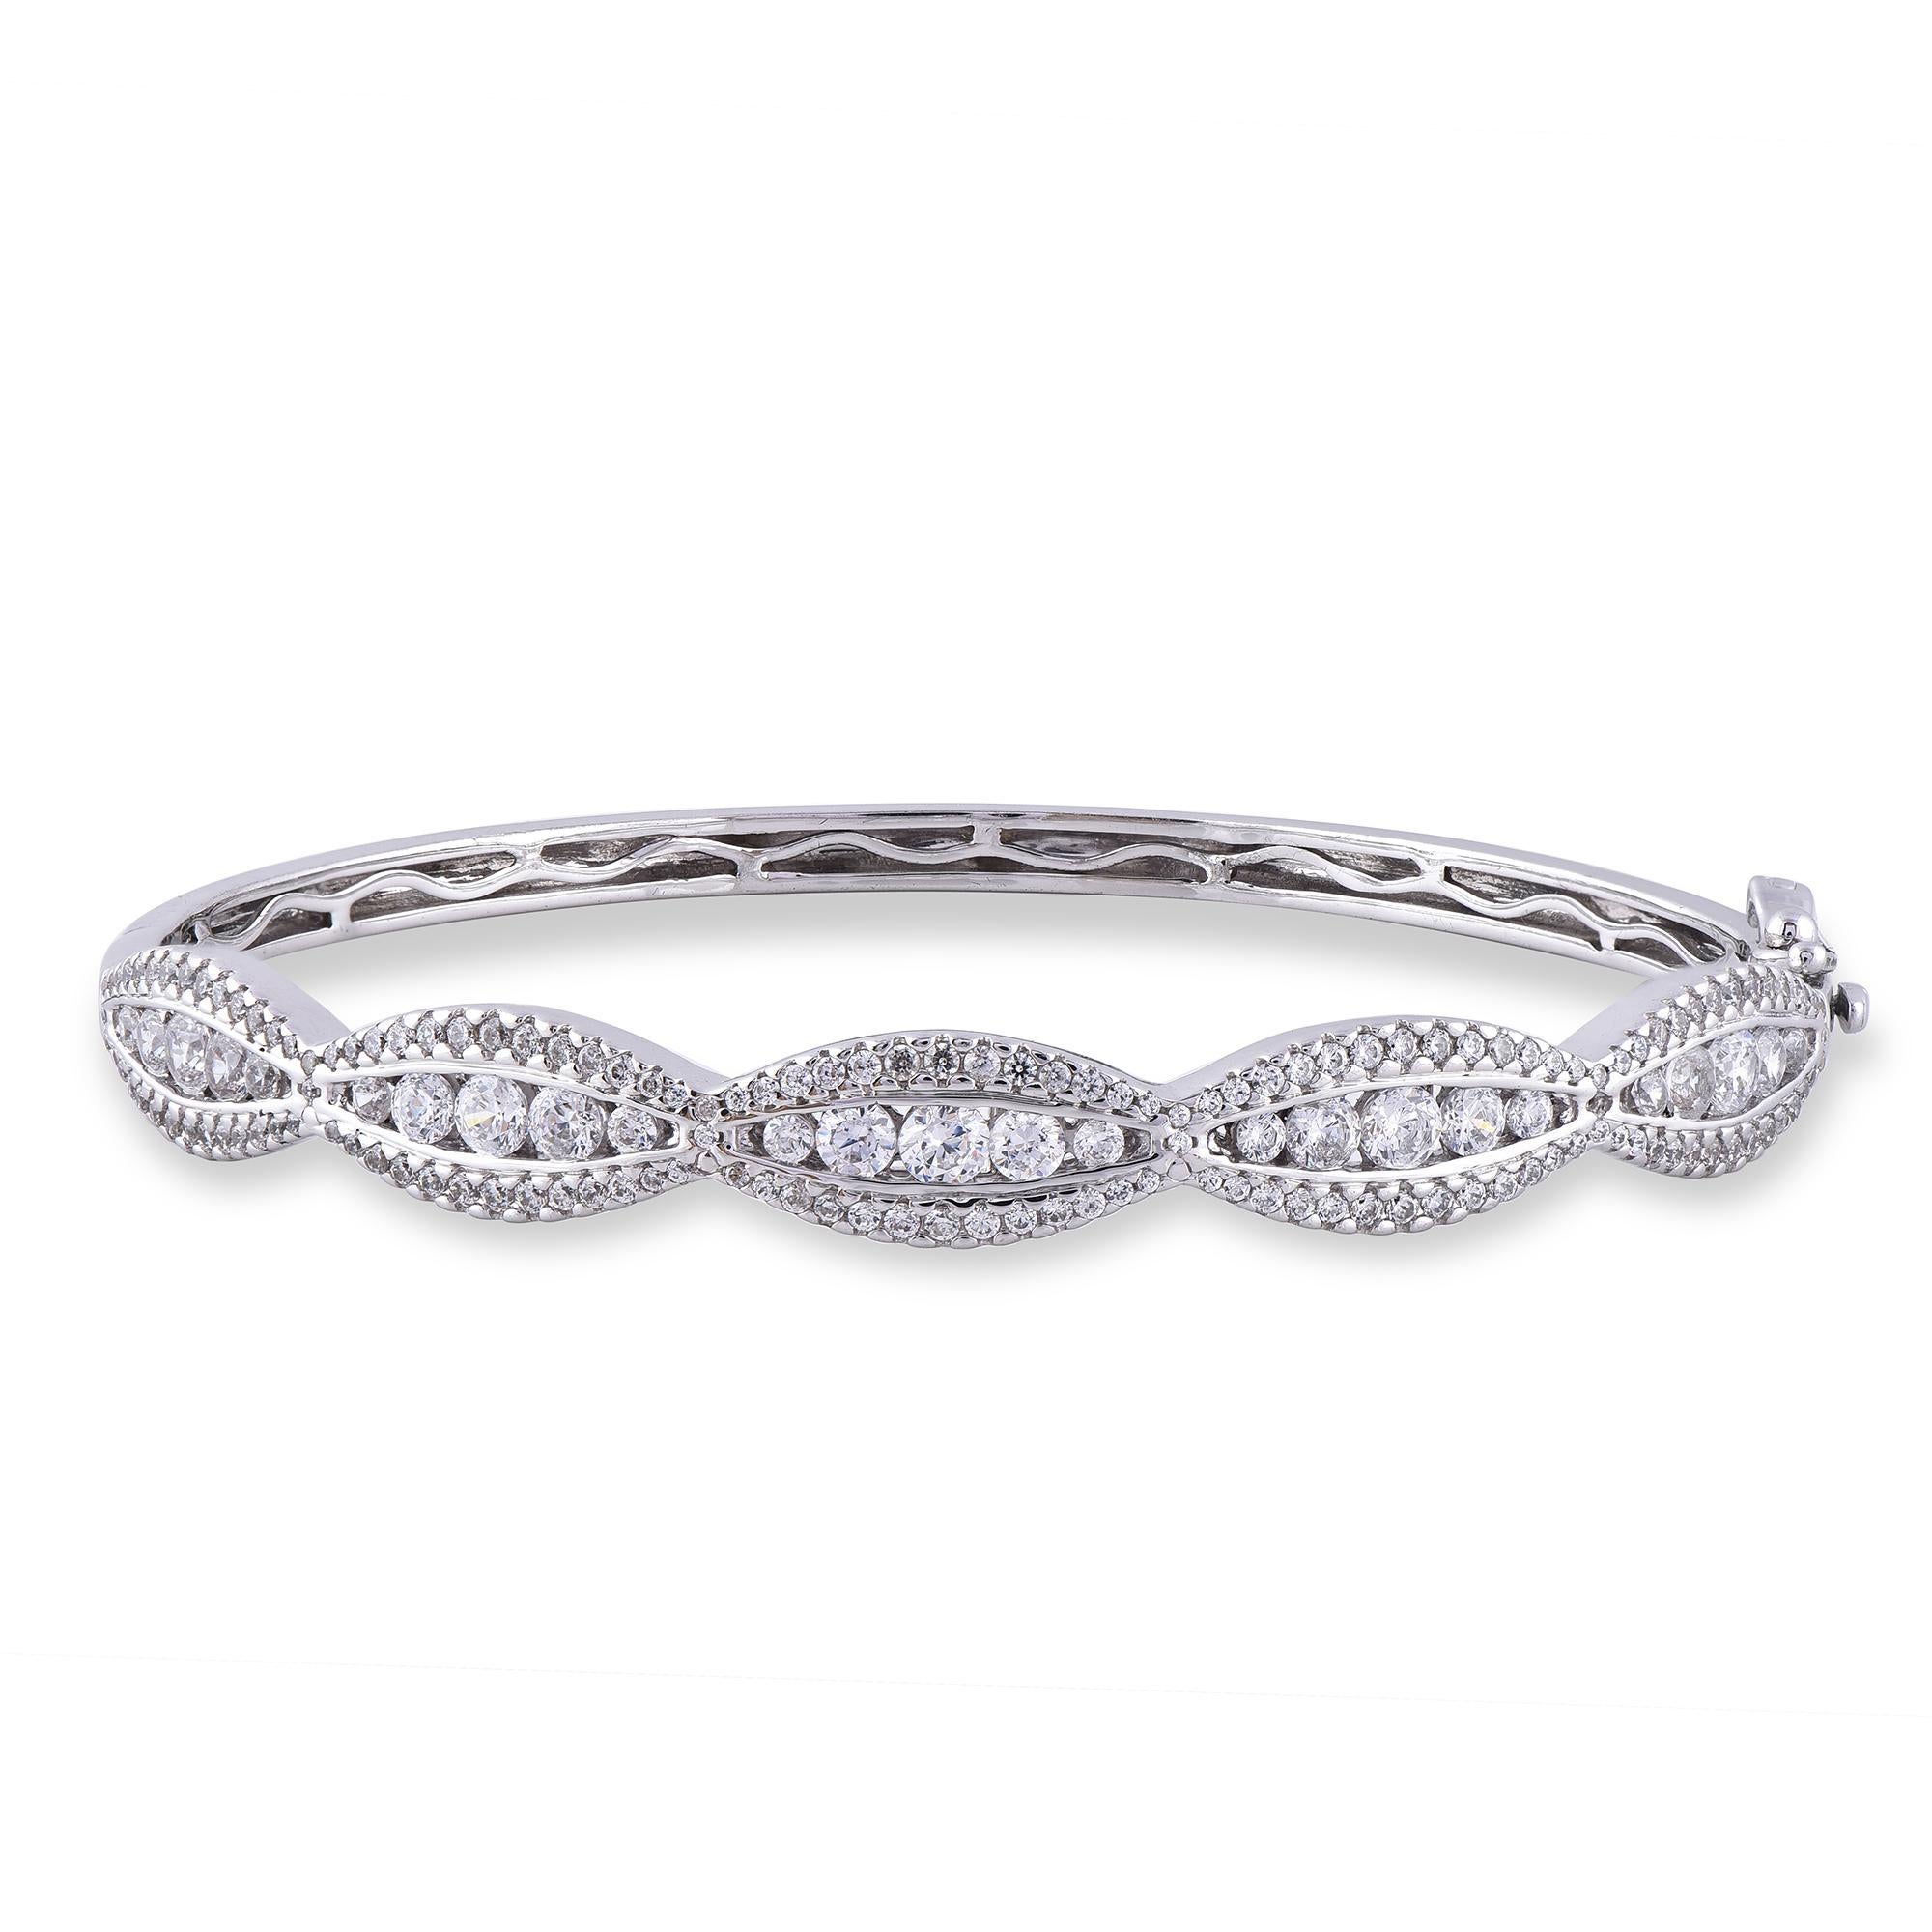 Gracefully stylized, this scallop-edged diamond bangle raises the sparkle factor. Embellished with 173 round brilliant-cut diamond set in micro-prong and channel setting. The total weight of diamond is 3.00 carat and shines brightly in H-I color I2